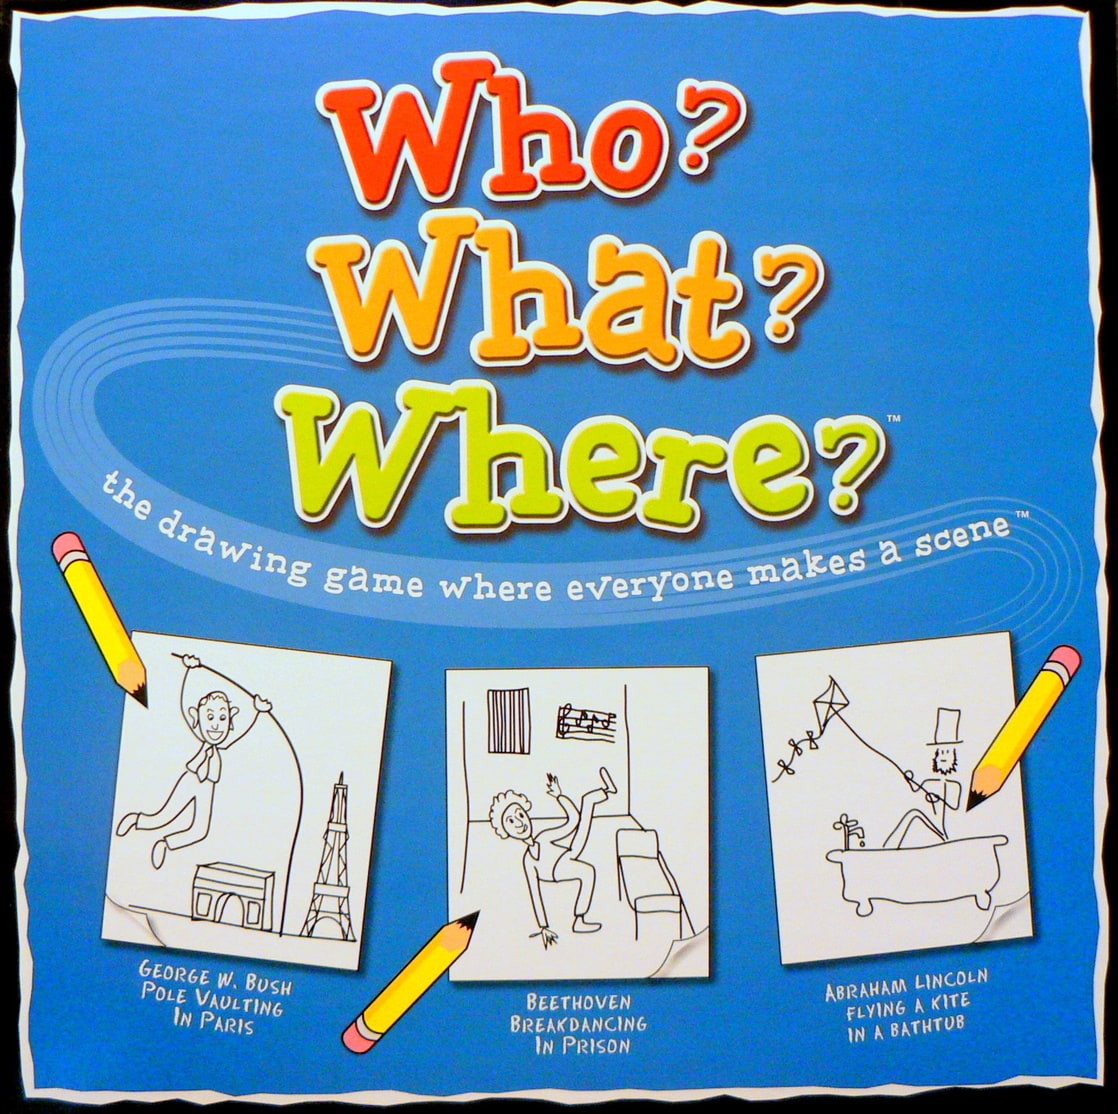 Who? What? Where?: The Drawing Game Where Everyone Makes a Scene